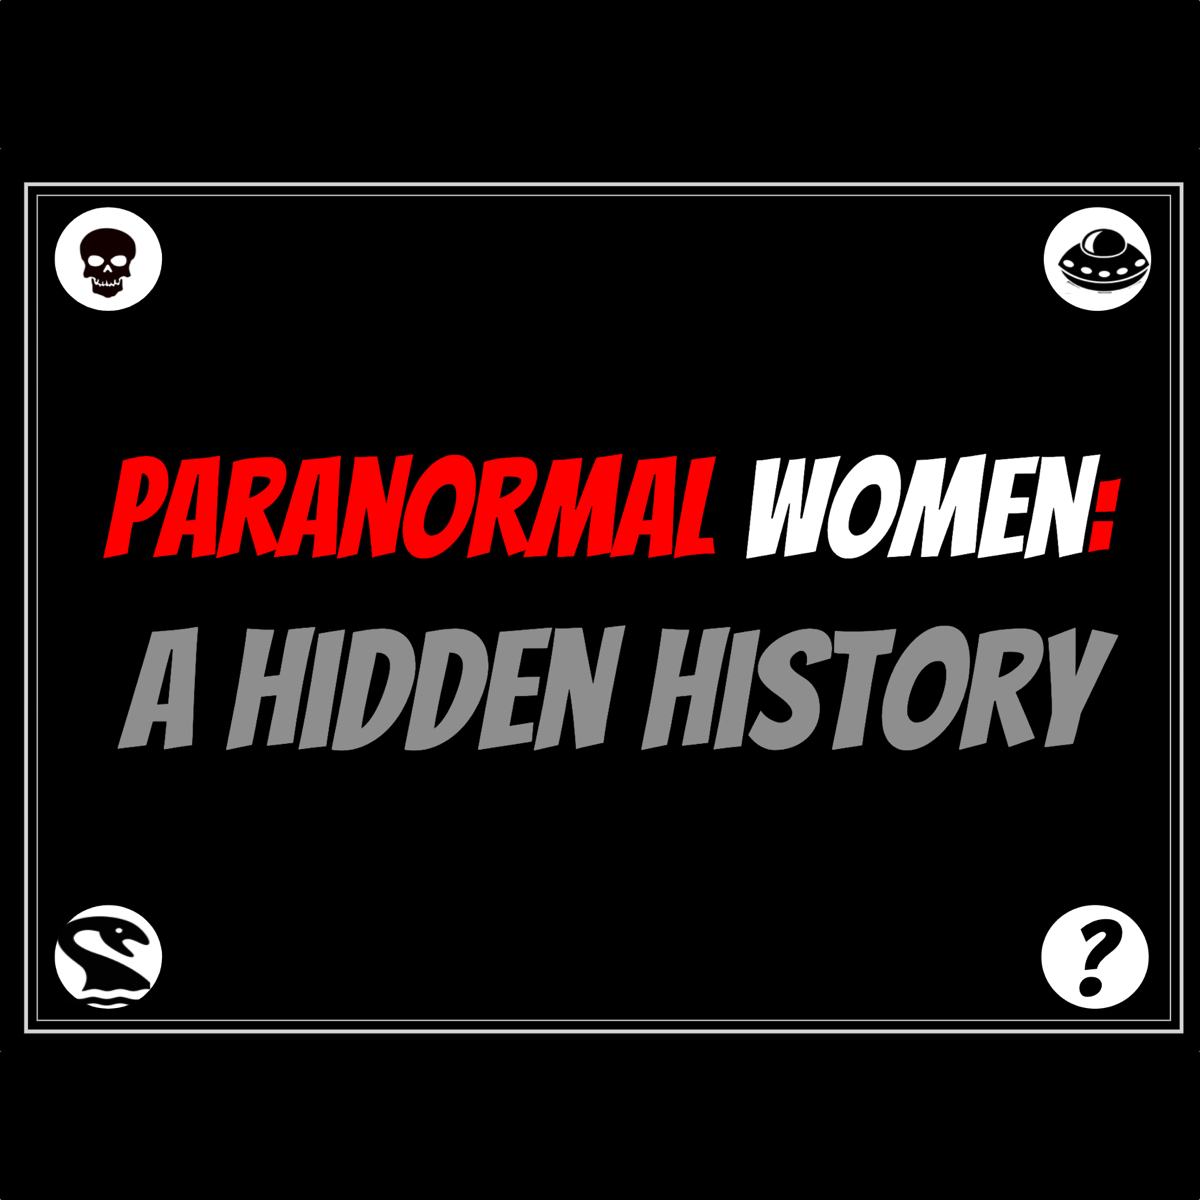 MTL012 - Women in Paranormal Research